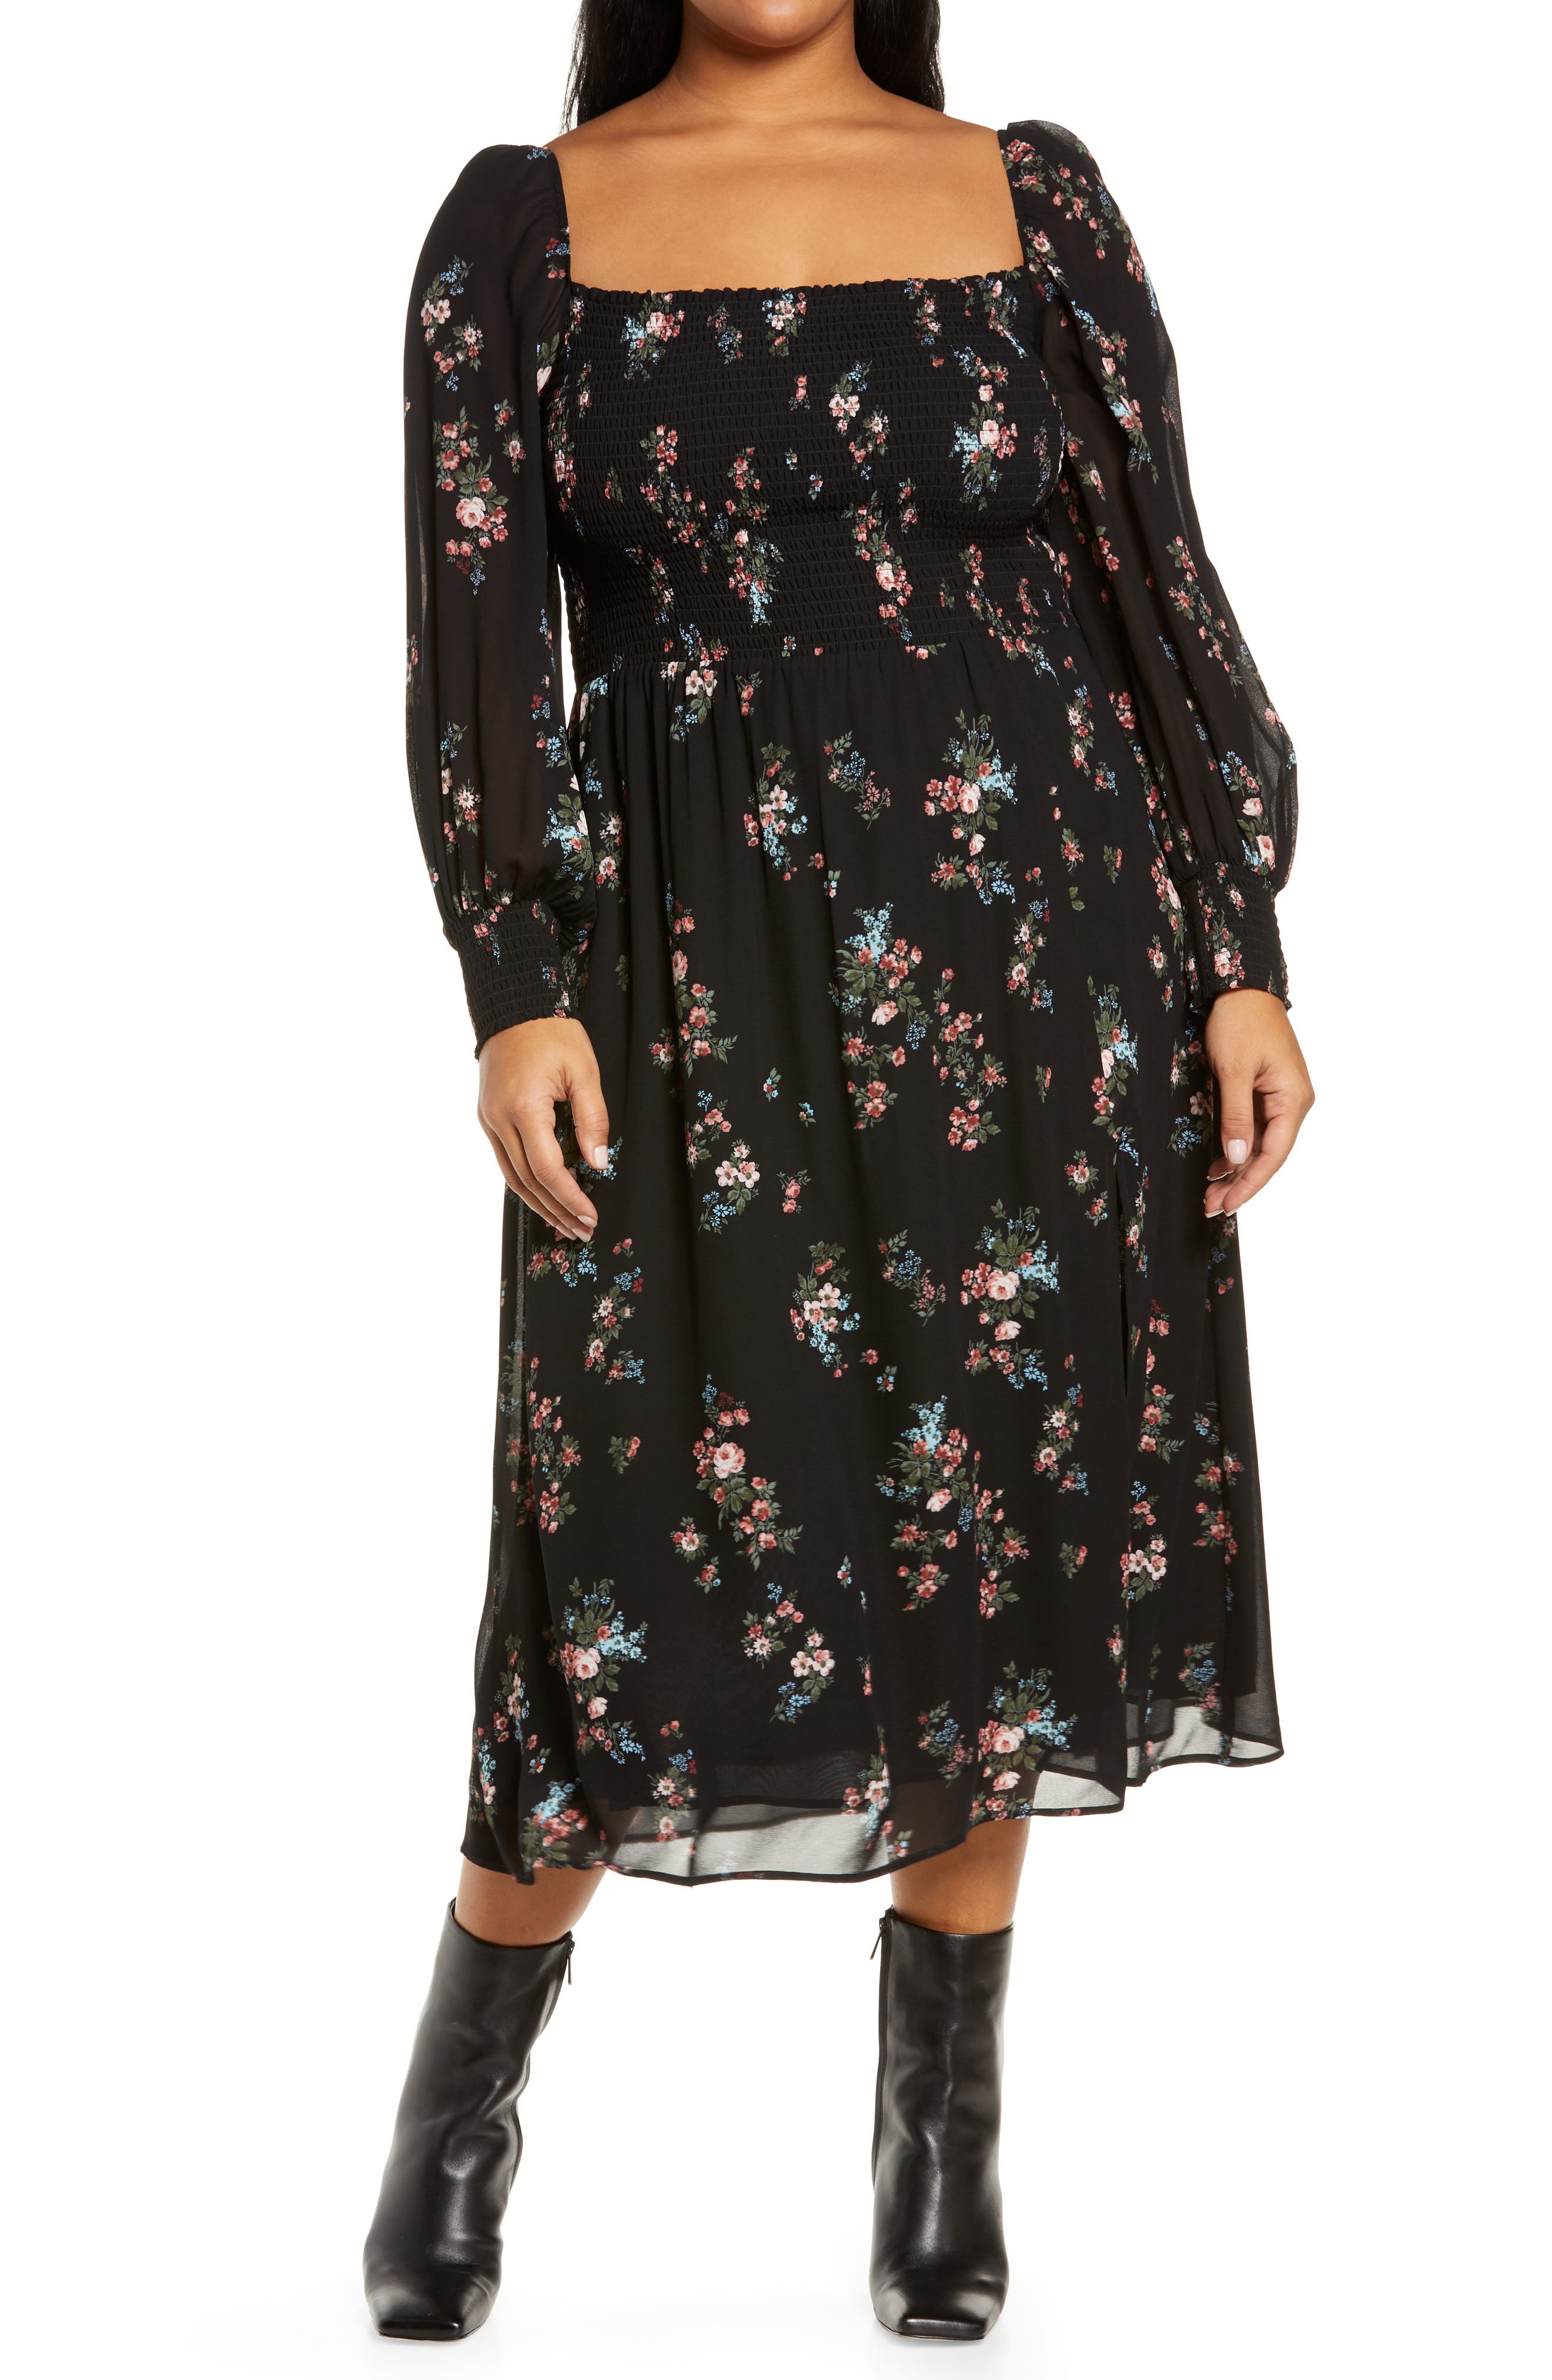 Reformation Cello Floral Long Sleeve Midi Dress in Marisol at Nordstrom, Size 1X